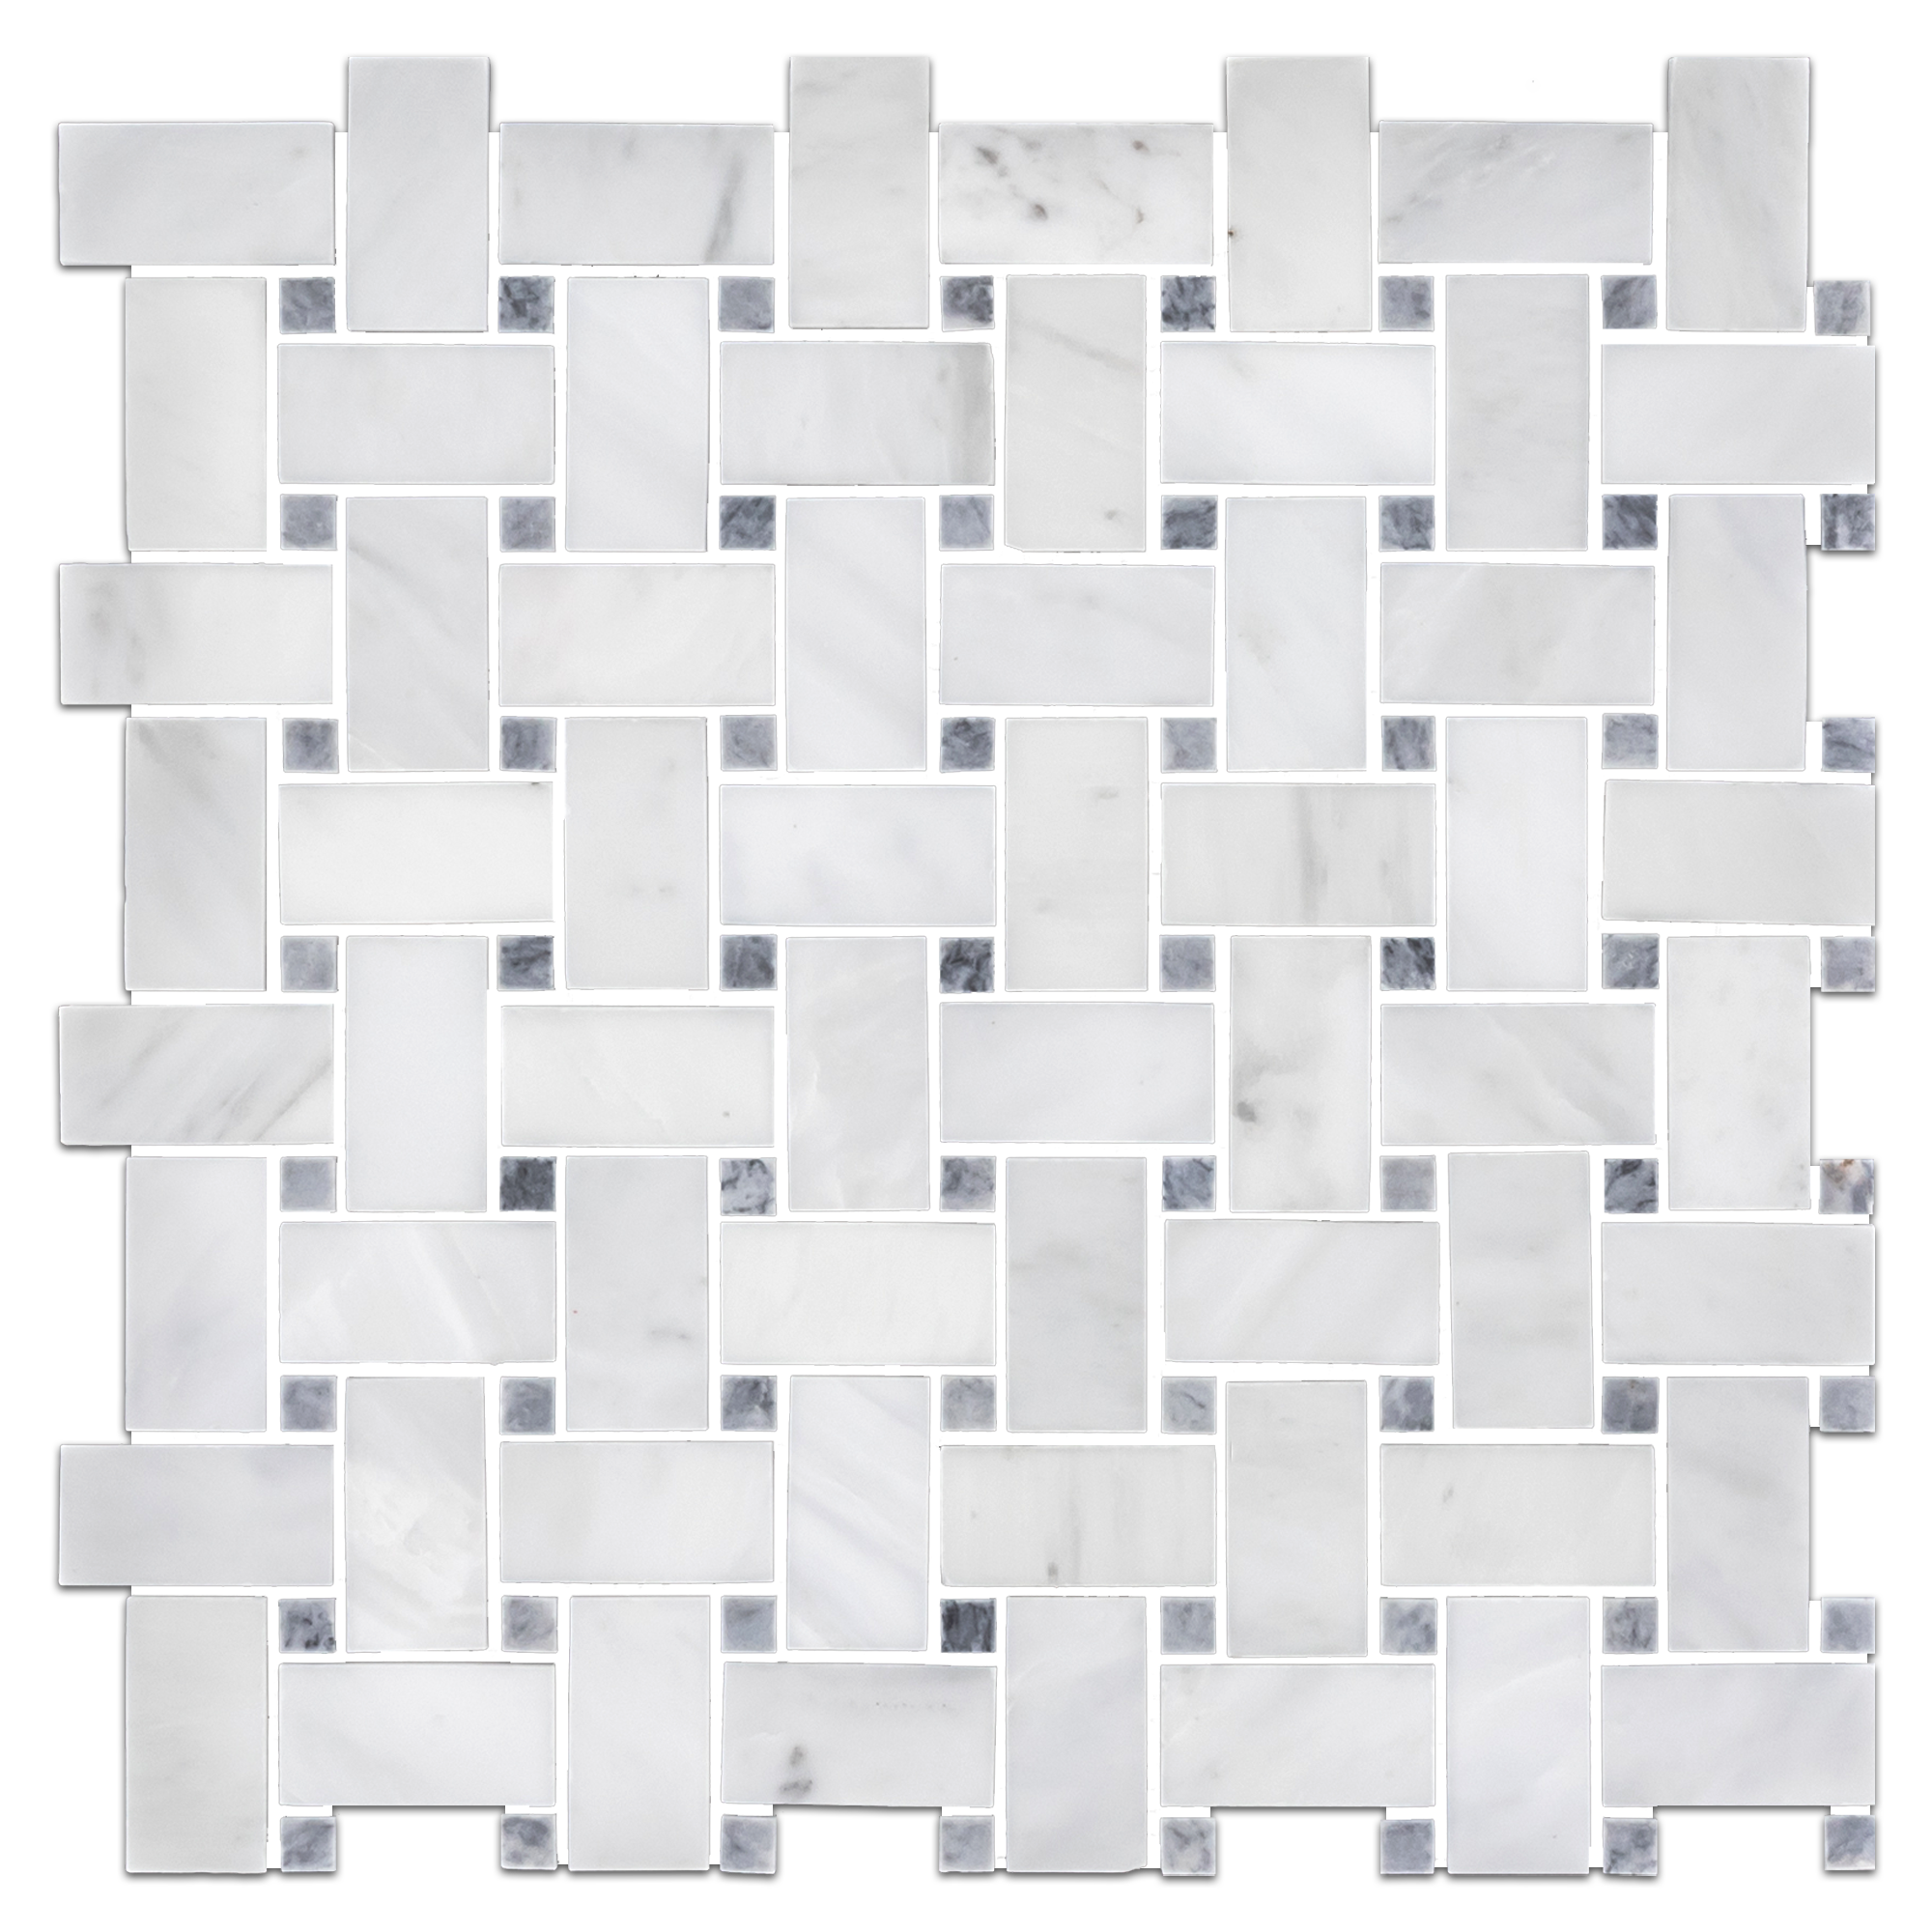 Elon Pearl White Pacific Gray Marble Stone Blend Basketweave Field Mosaic 12x12x0.375 Polished - AM1100P Surface Group International Product